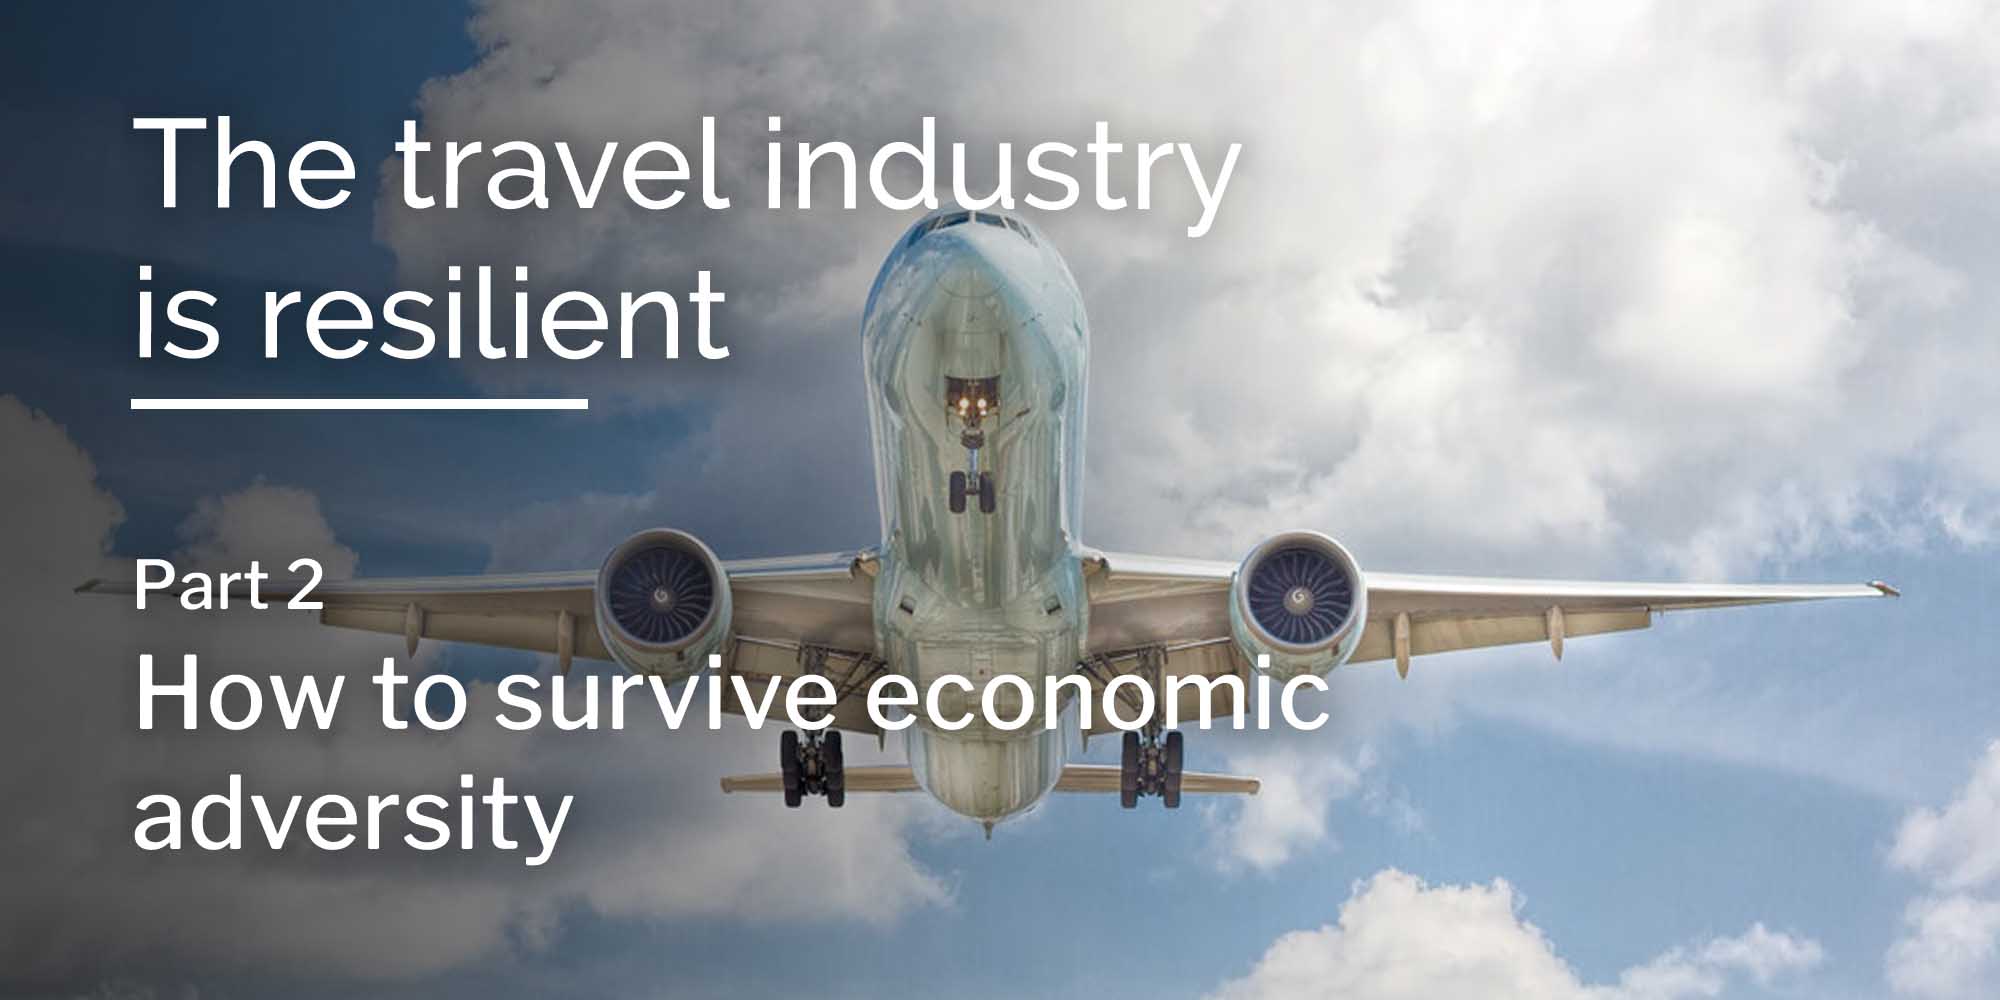 The travel industry is resilient: How to survive economic adversity